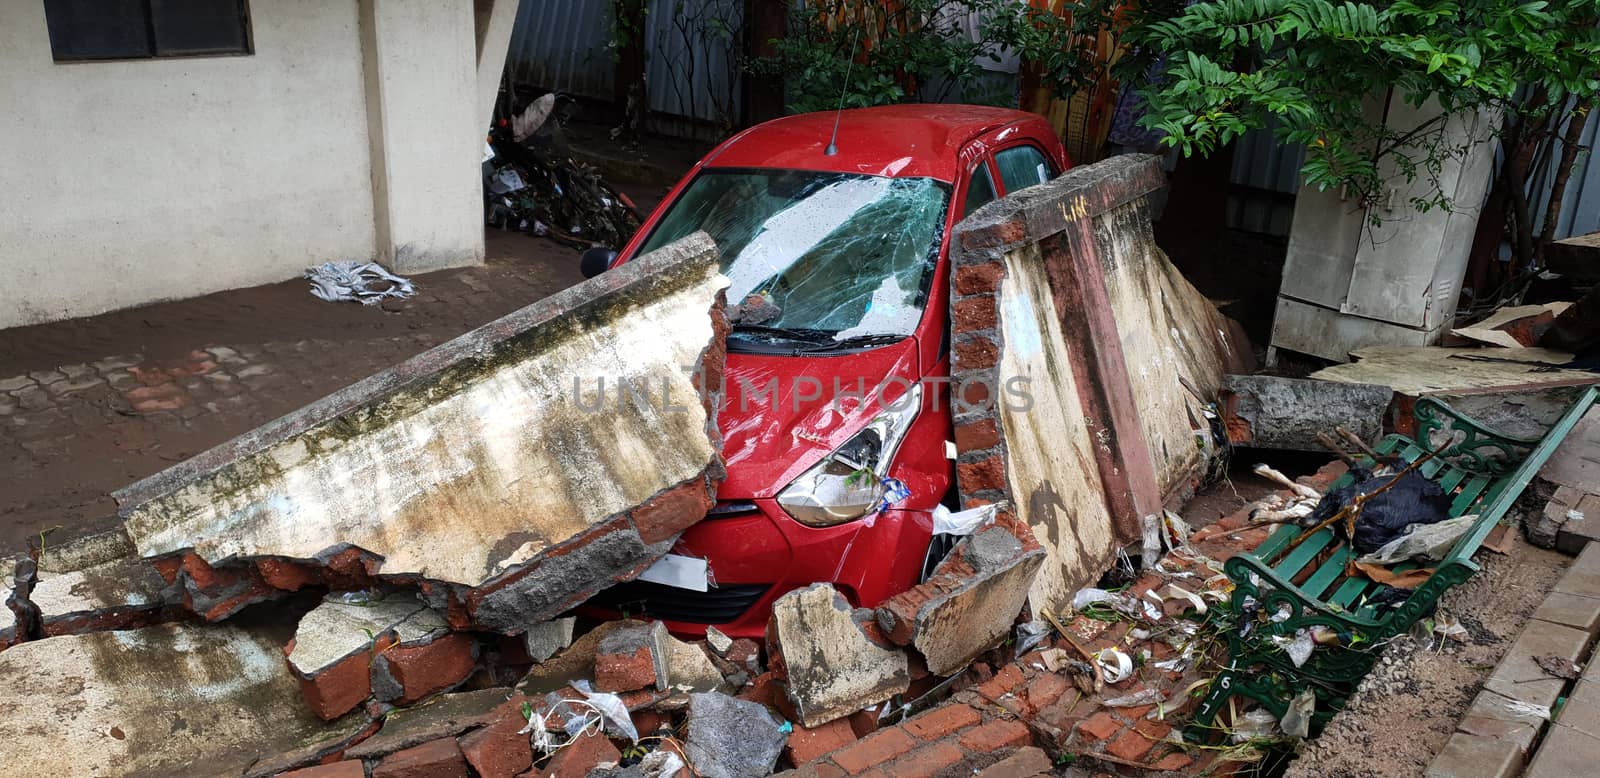 A car destroyed by a wall during floods in India, during the monsoons.